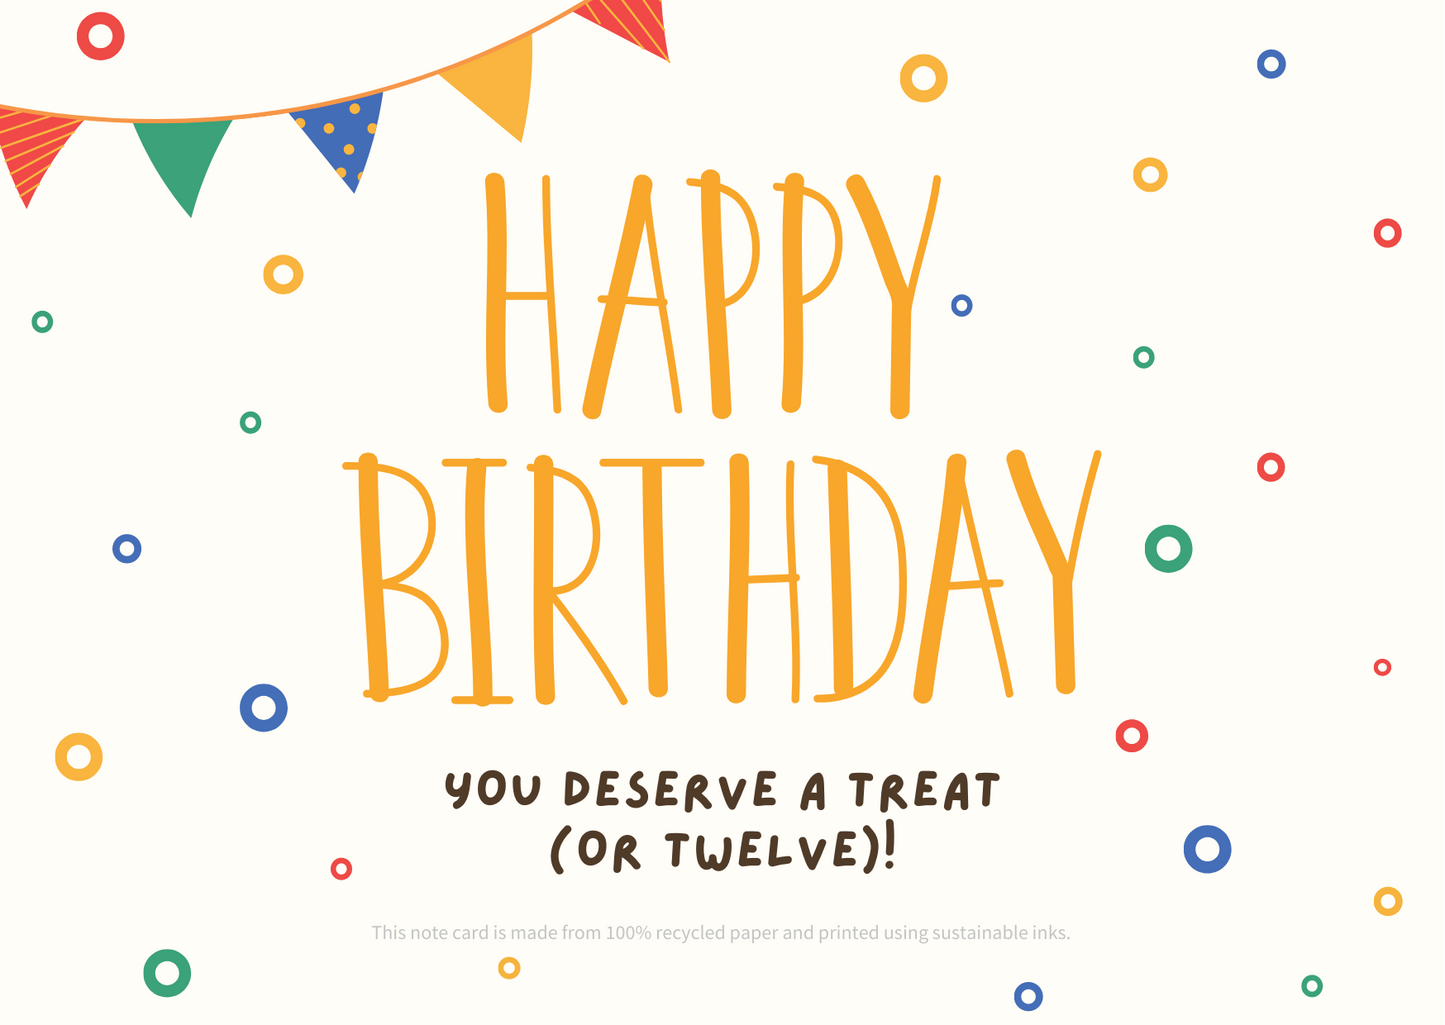 happy birthday card for office pantry and gifting snack boxes